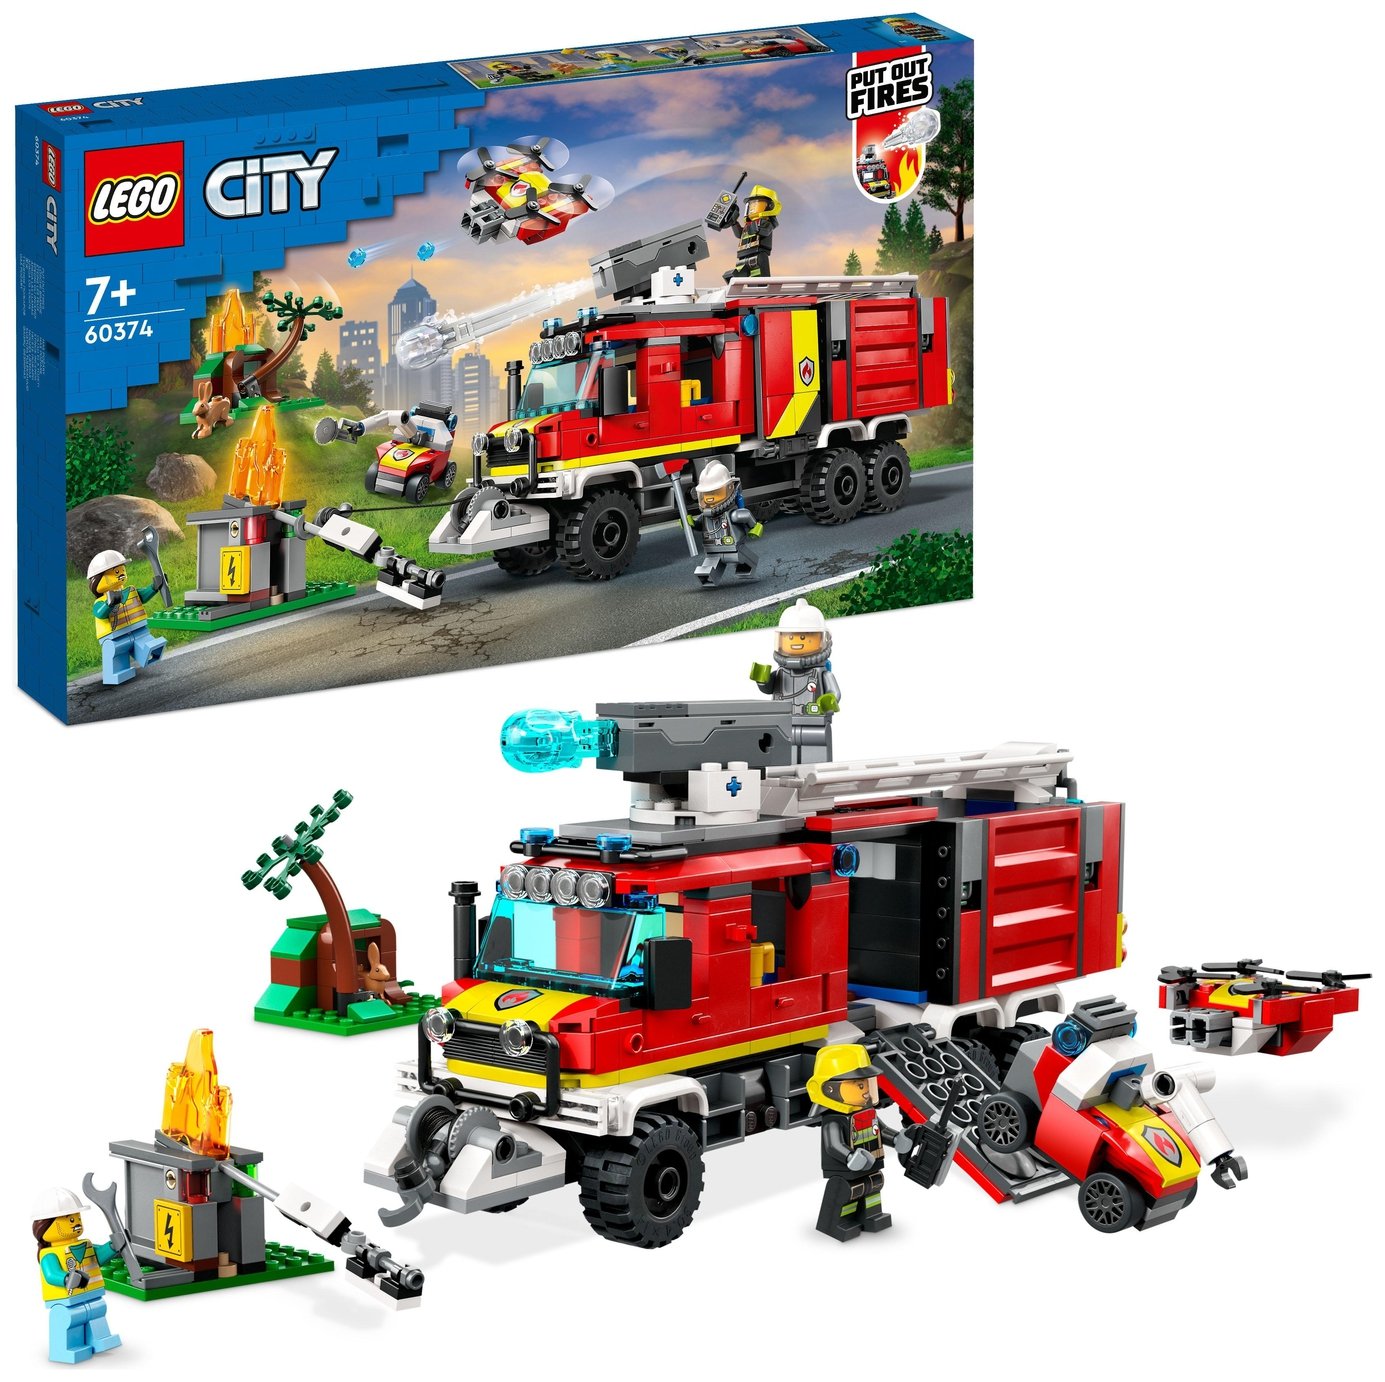 LEGO City Fire Command Unit Set with Fire Engine Toy 60374 review